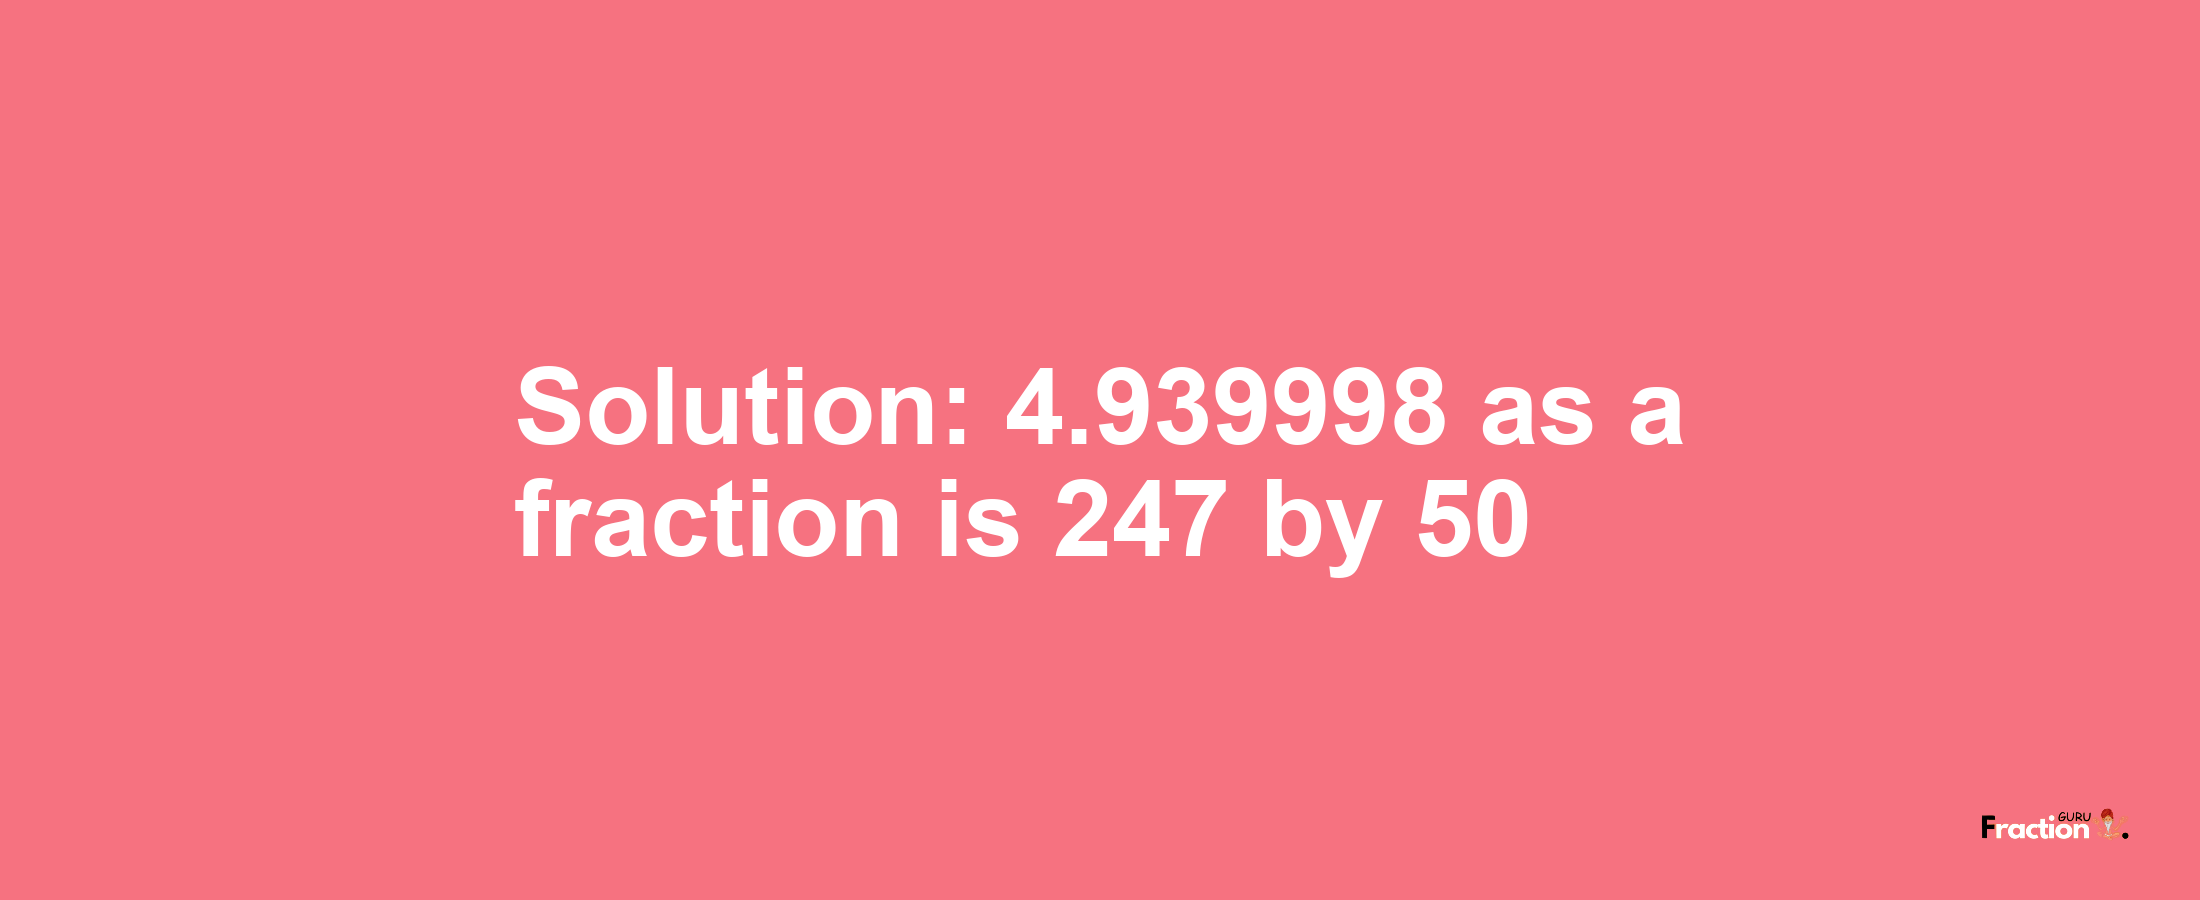 Solution:4.939998 as a fraction is 247/50